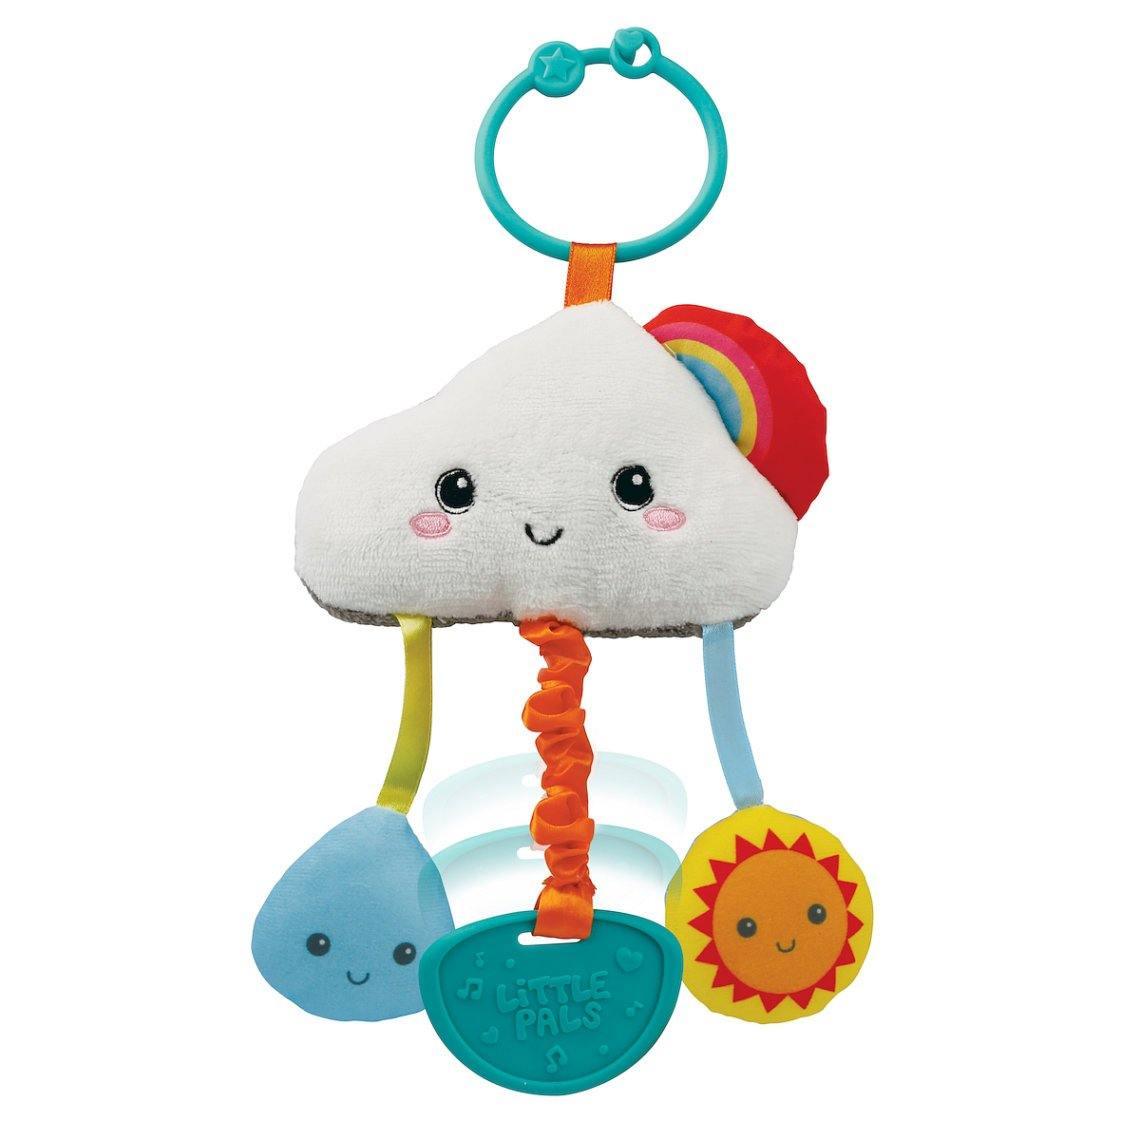 WinFun Day Night Cloud Pal - BumbleToys - 0-24 Months, Cecil, Nursery Toys, Unisex